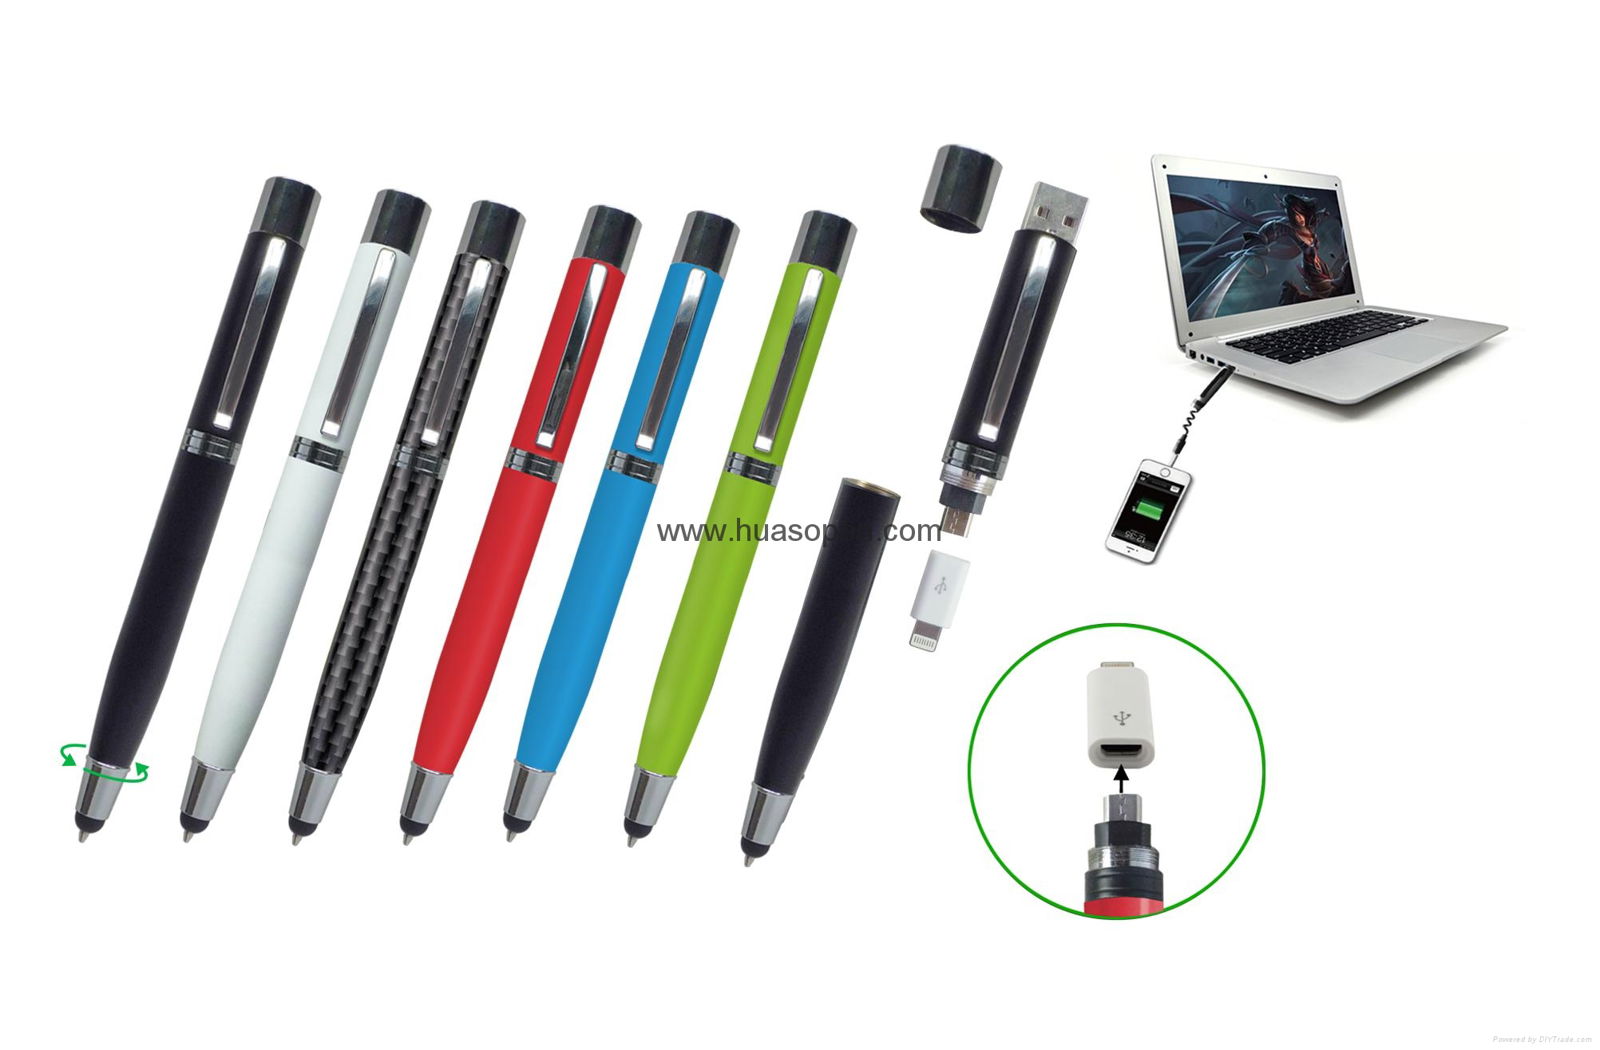  Cellphone charger & Touch stylus ball pen